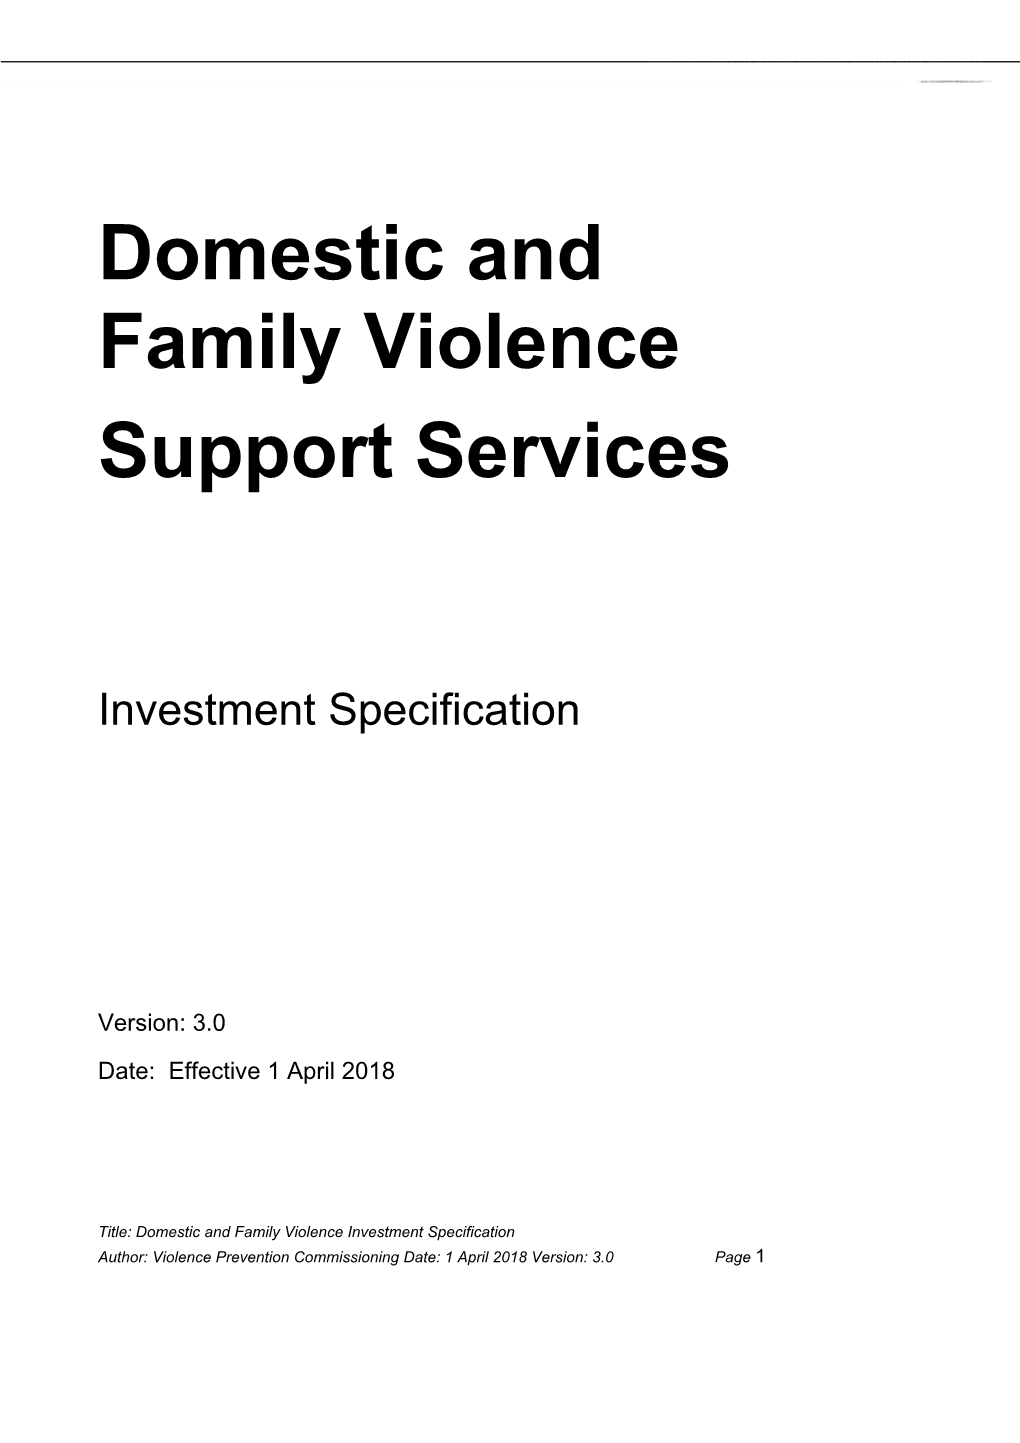 Investment Specification DFV